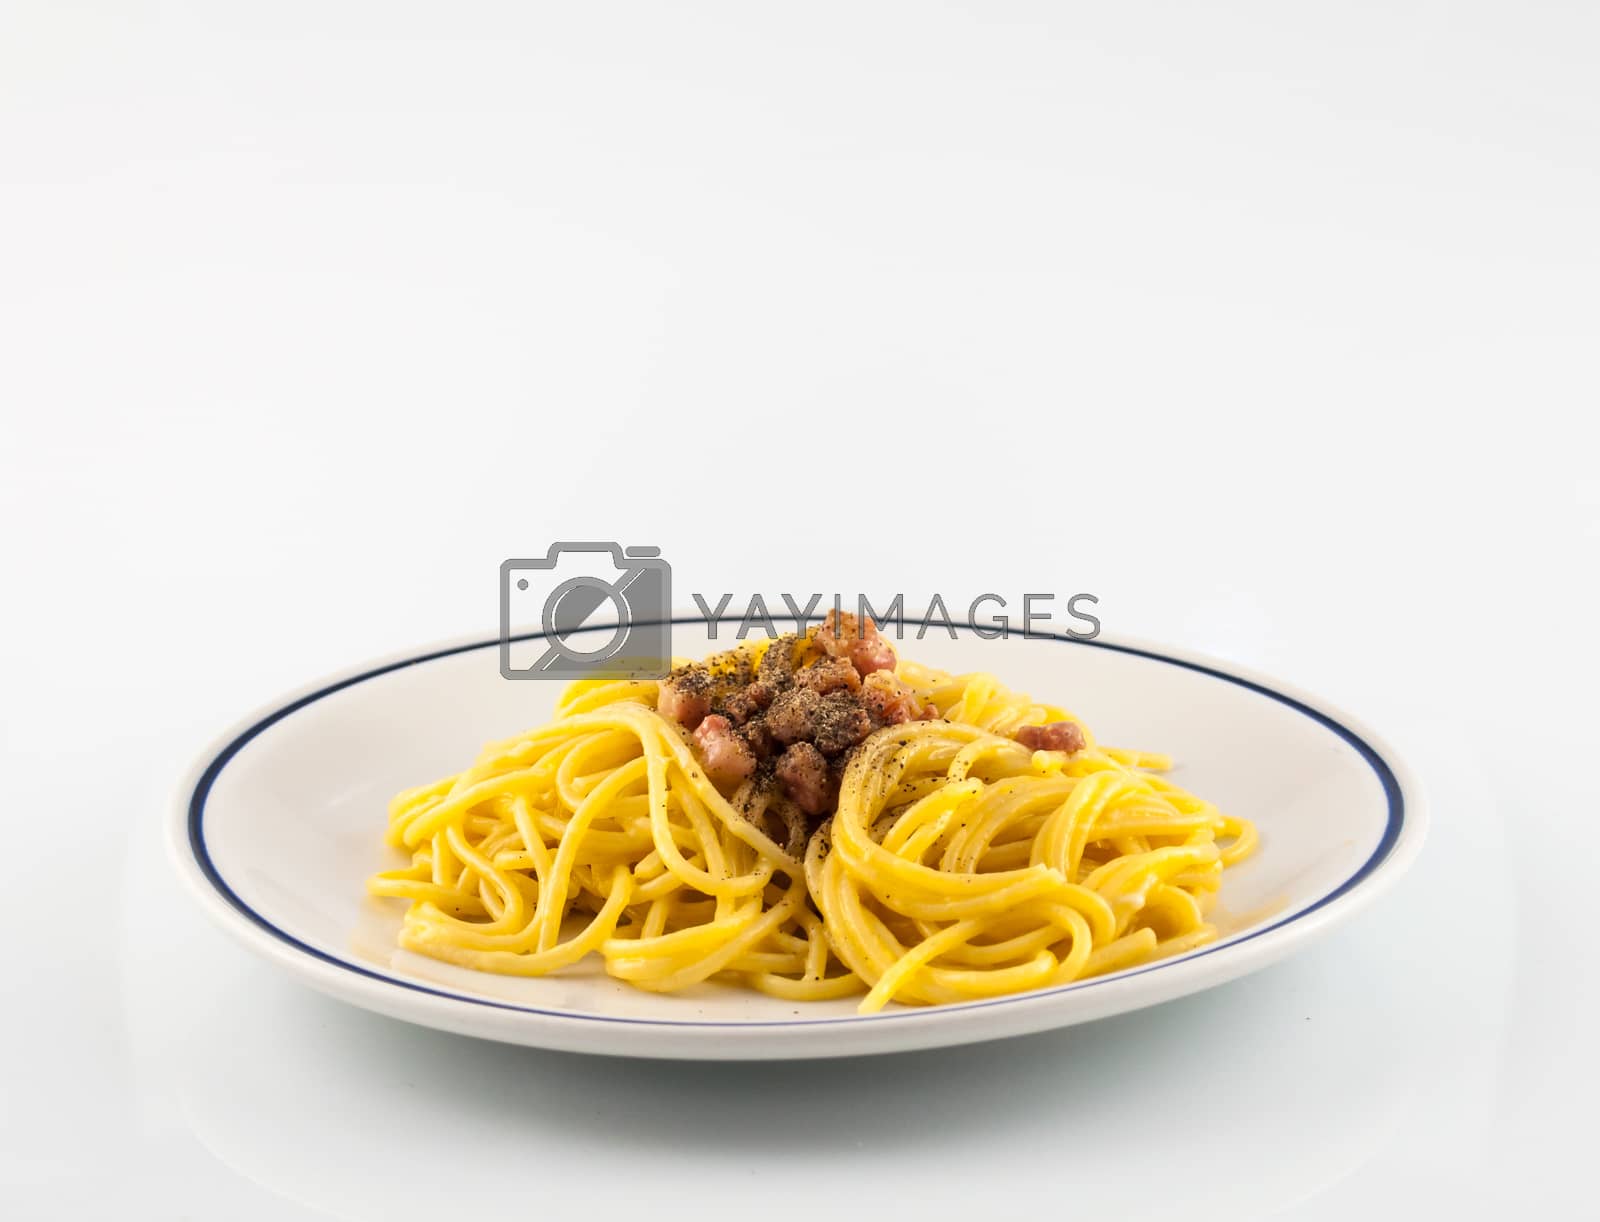 Royalty free image of spaghetti with a bacon, egg and cheese sauce by replica